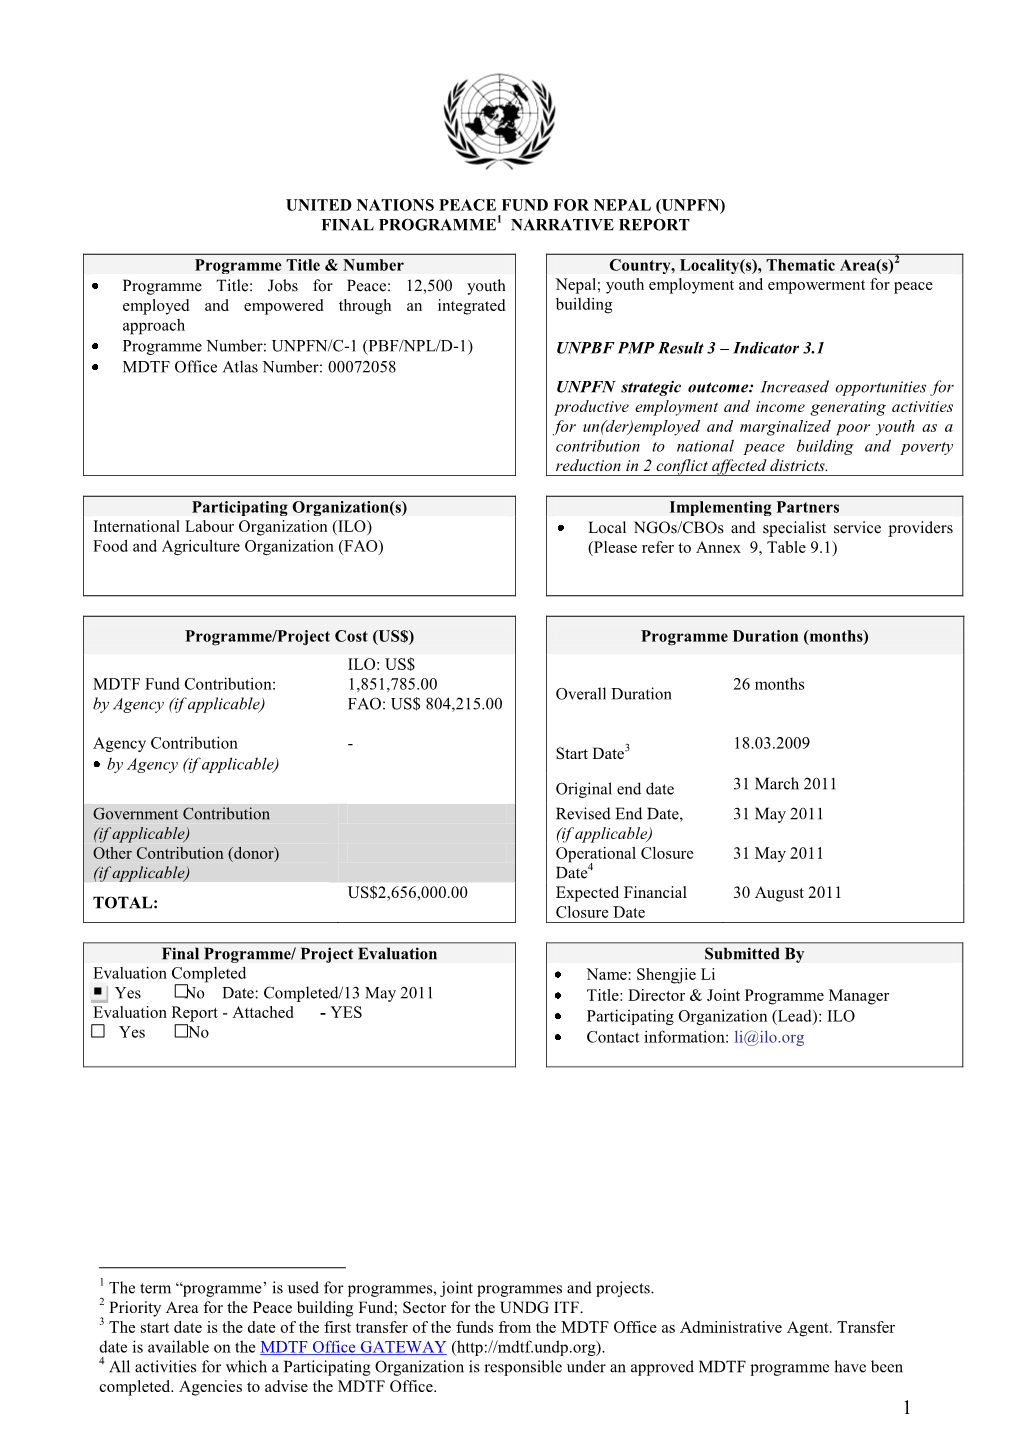 United Nations Peace Fund for Nepal (Unpfn) Final Programme1 Narrative Report